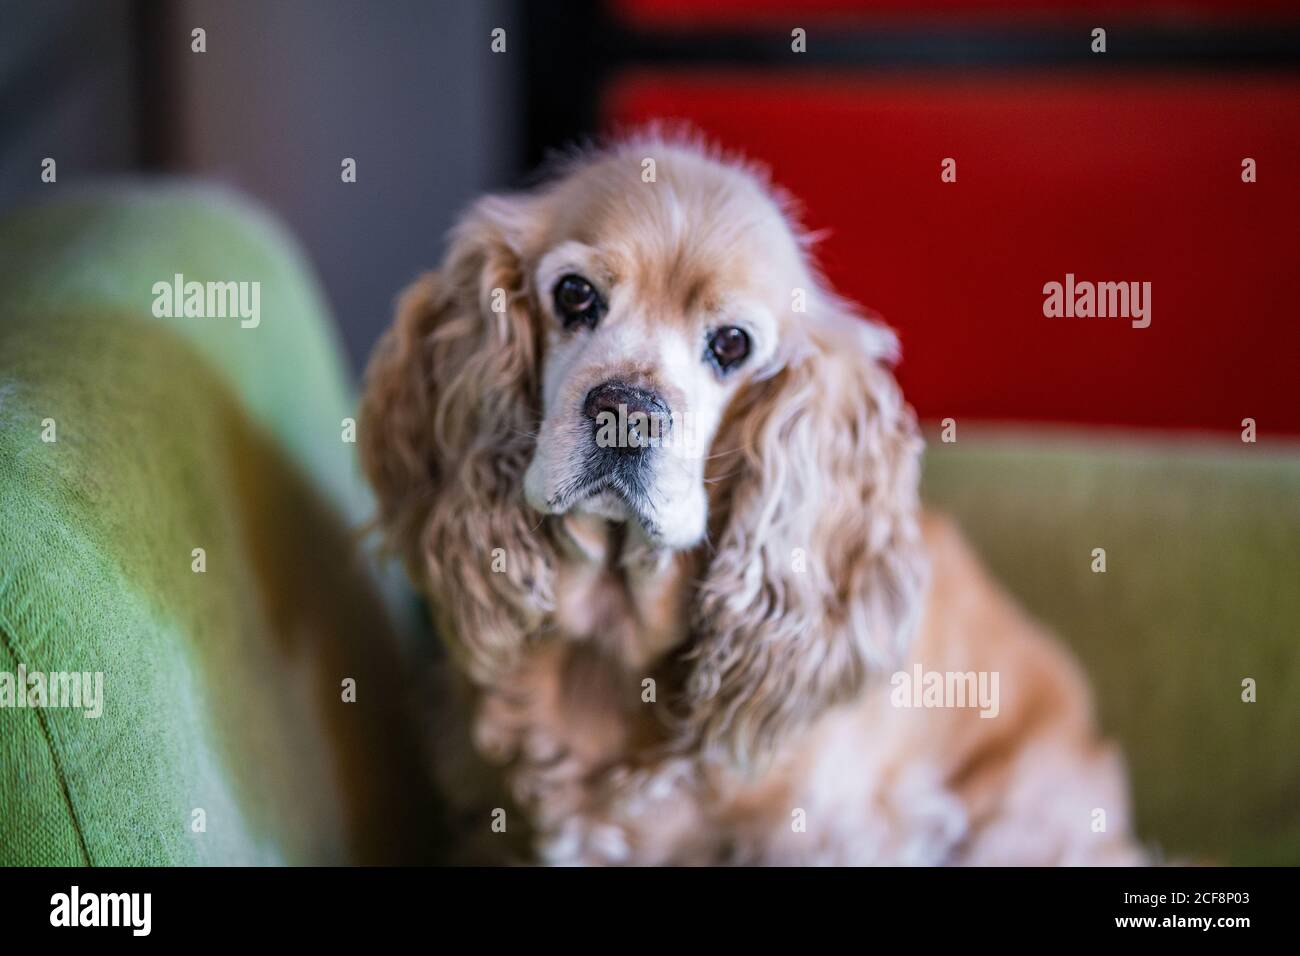 Cute tranquil Cocker Spaniel dog sitting on sofa and looking at camera while resting in cozy room Stock Photo